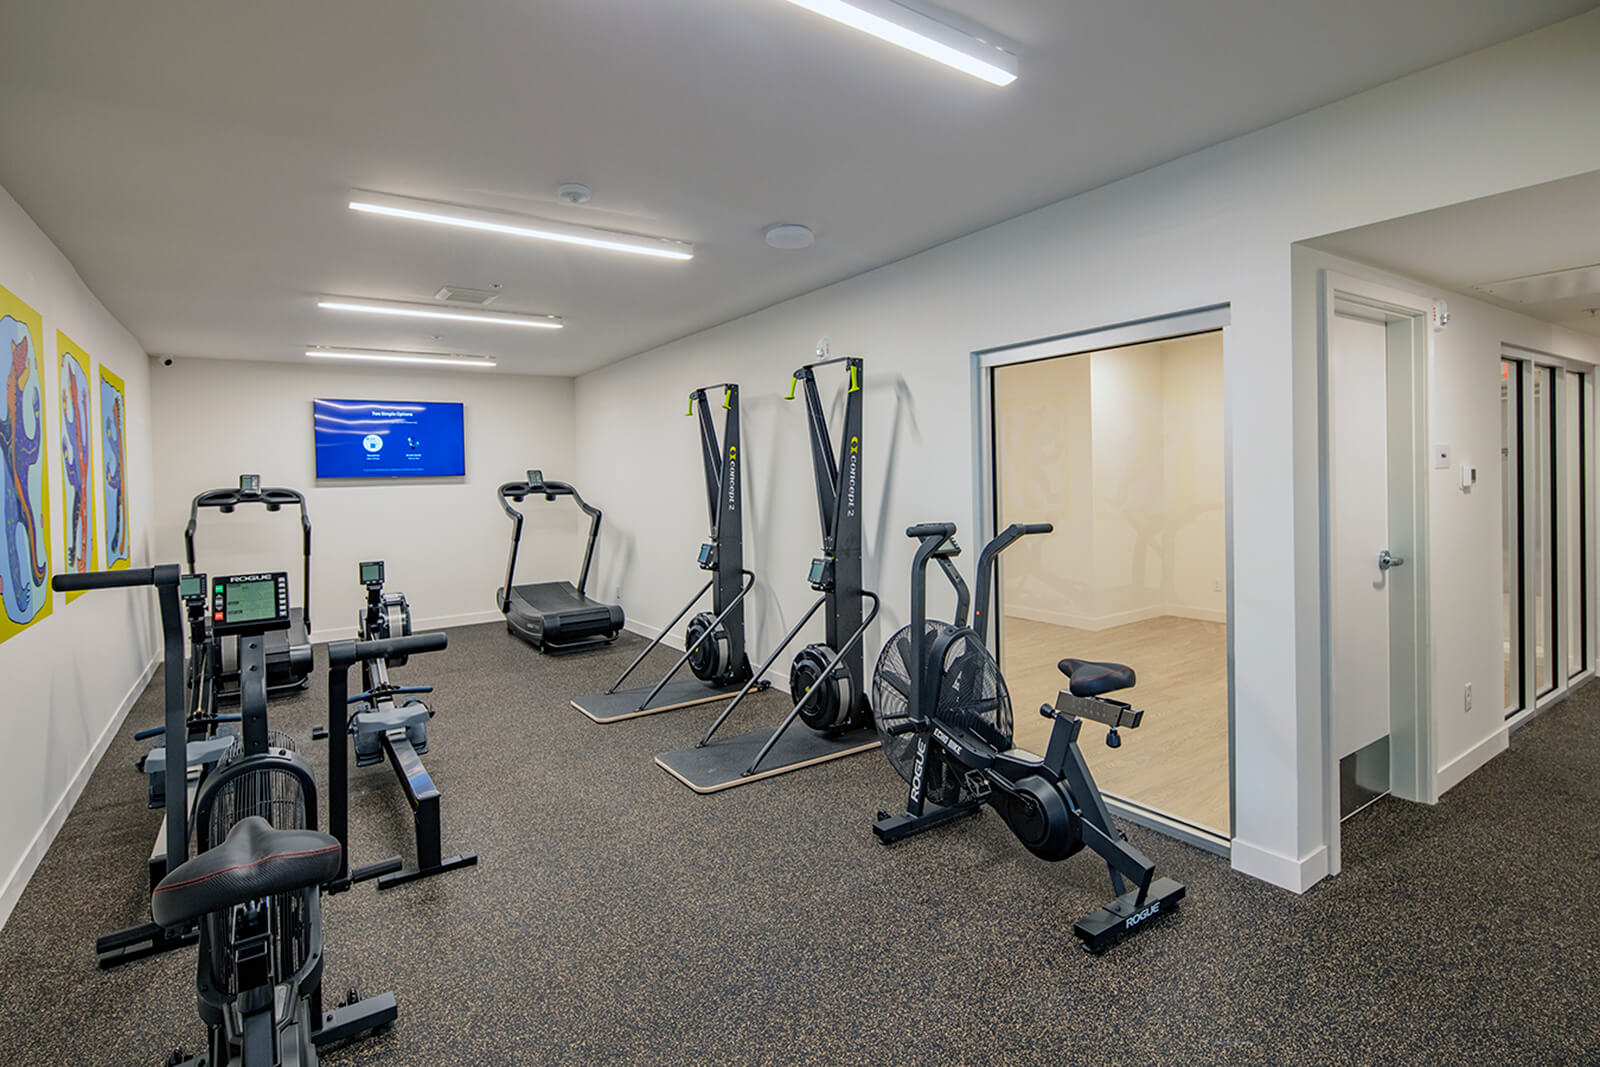 rogue fitness cardio and exercise equipment in the wakpada minneapolis apartments fitness center